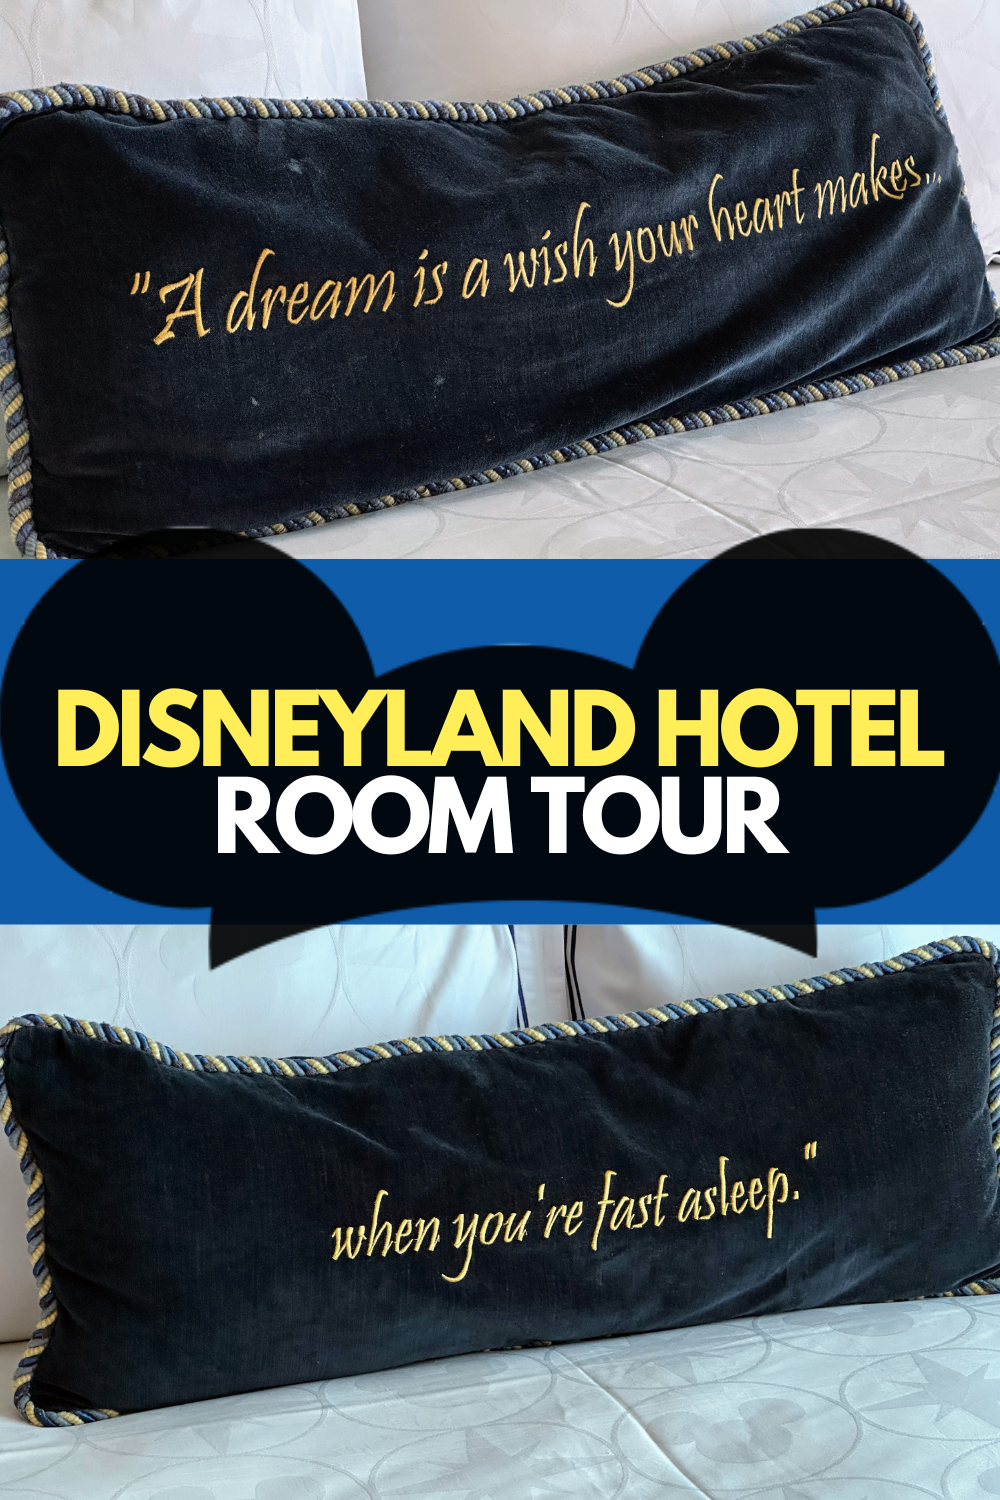 Disneyland hotel pillows- a dream is a wish your heart makes when you are fast asleep. Disneyland Hotel room tour.